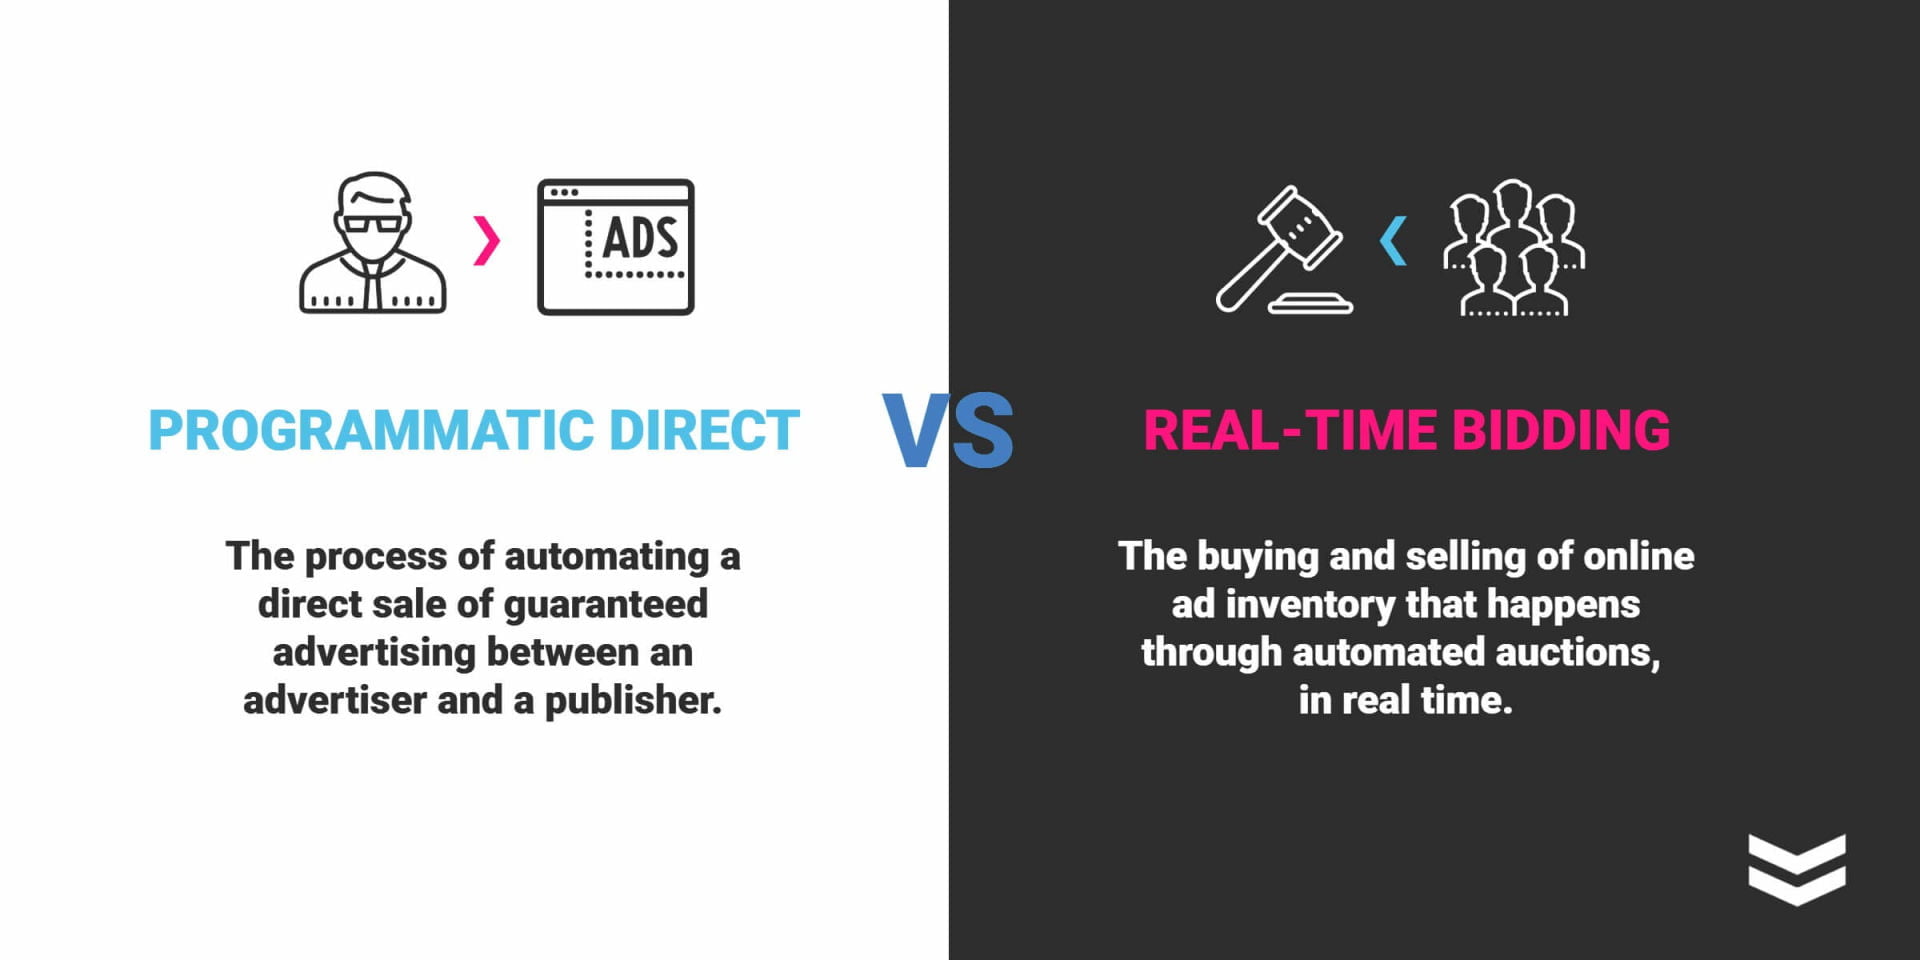 hektar kjole laver mad Programmatic Direct VS Real-Time Bidding: What's the Difference? » War Room  Inc